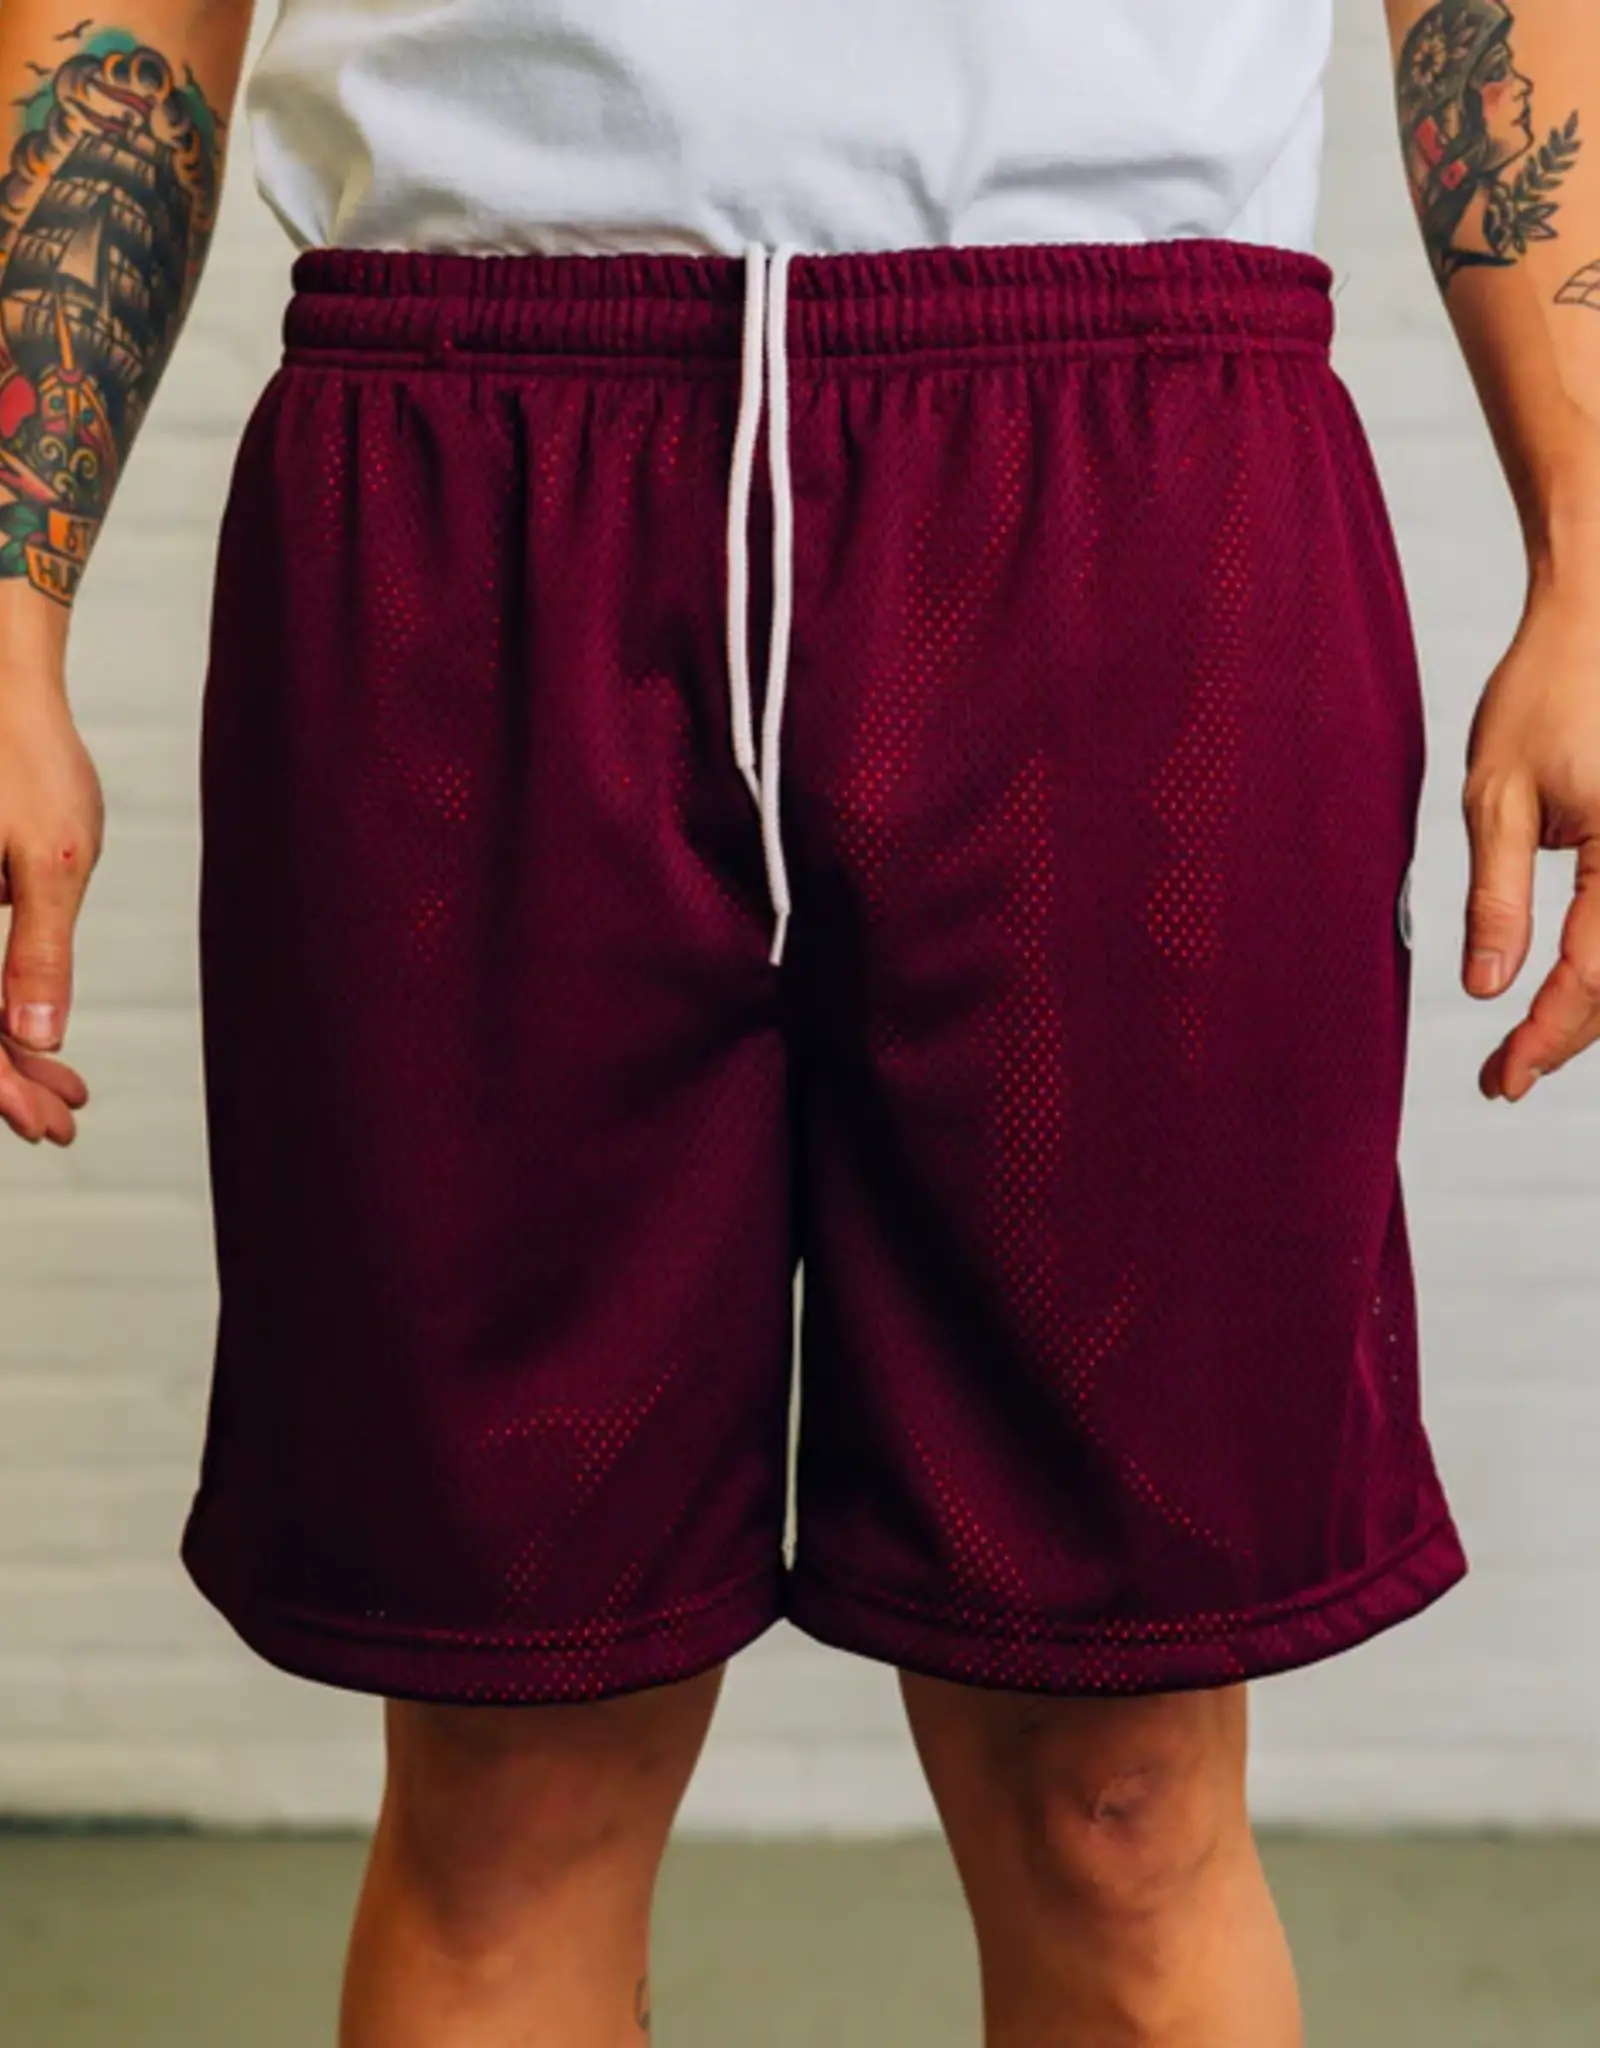 RAISED BY WOLVES RAISED BY WOLVES - TWO TONE MESH SHORTS BURGUNDY/ORANGE